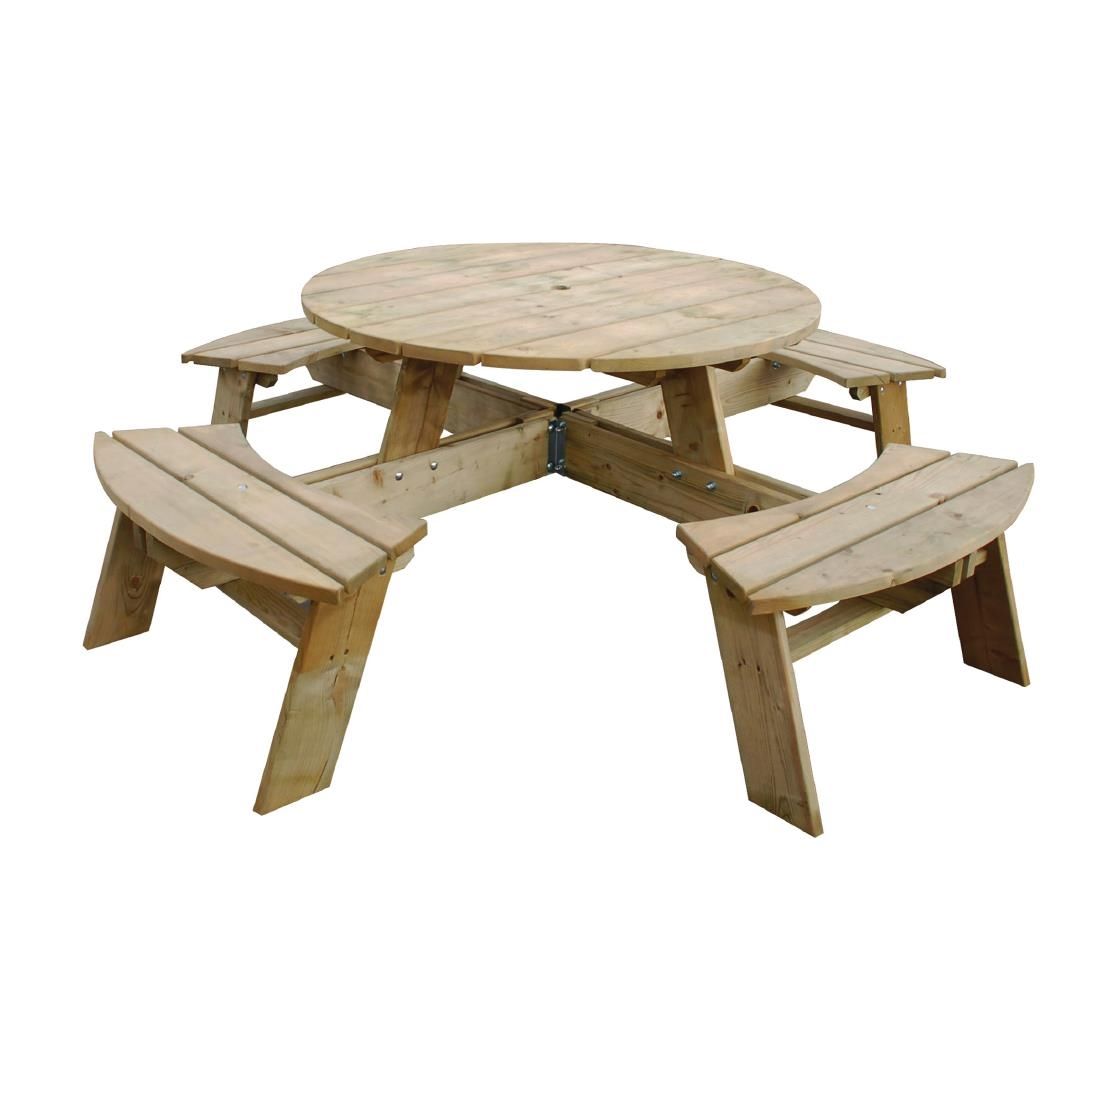 Rowlinson Round Wooden Picnic Table 6.5ft